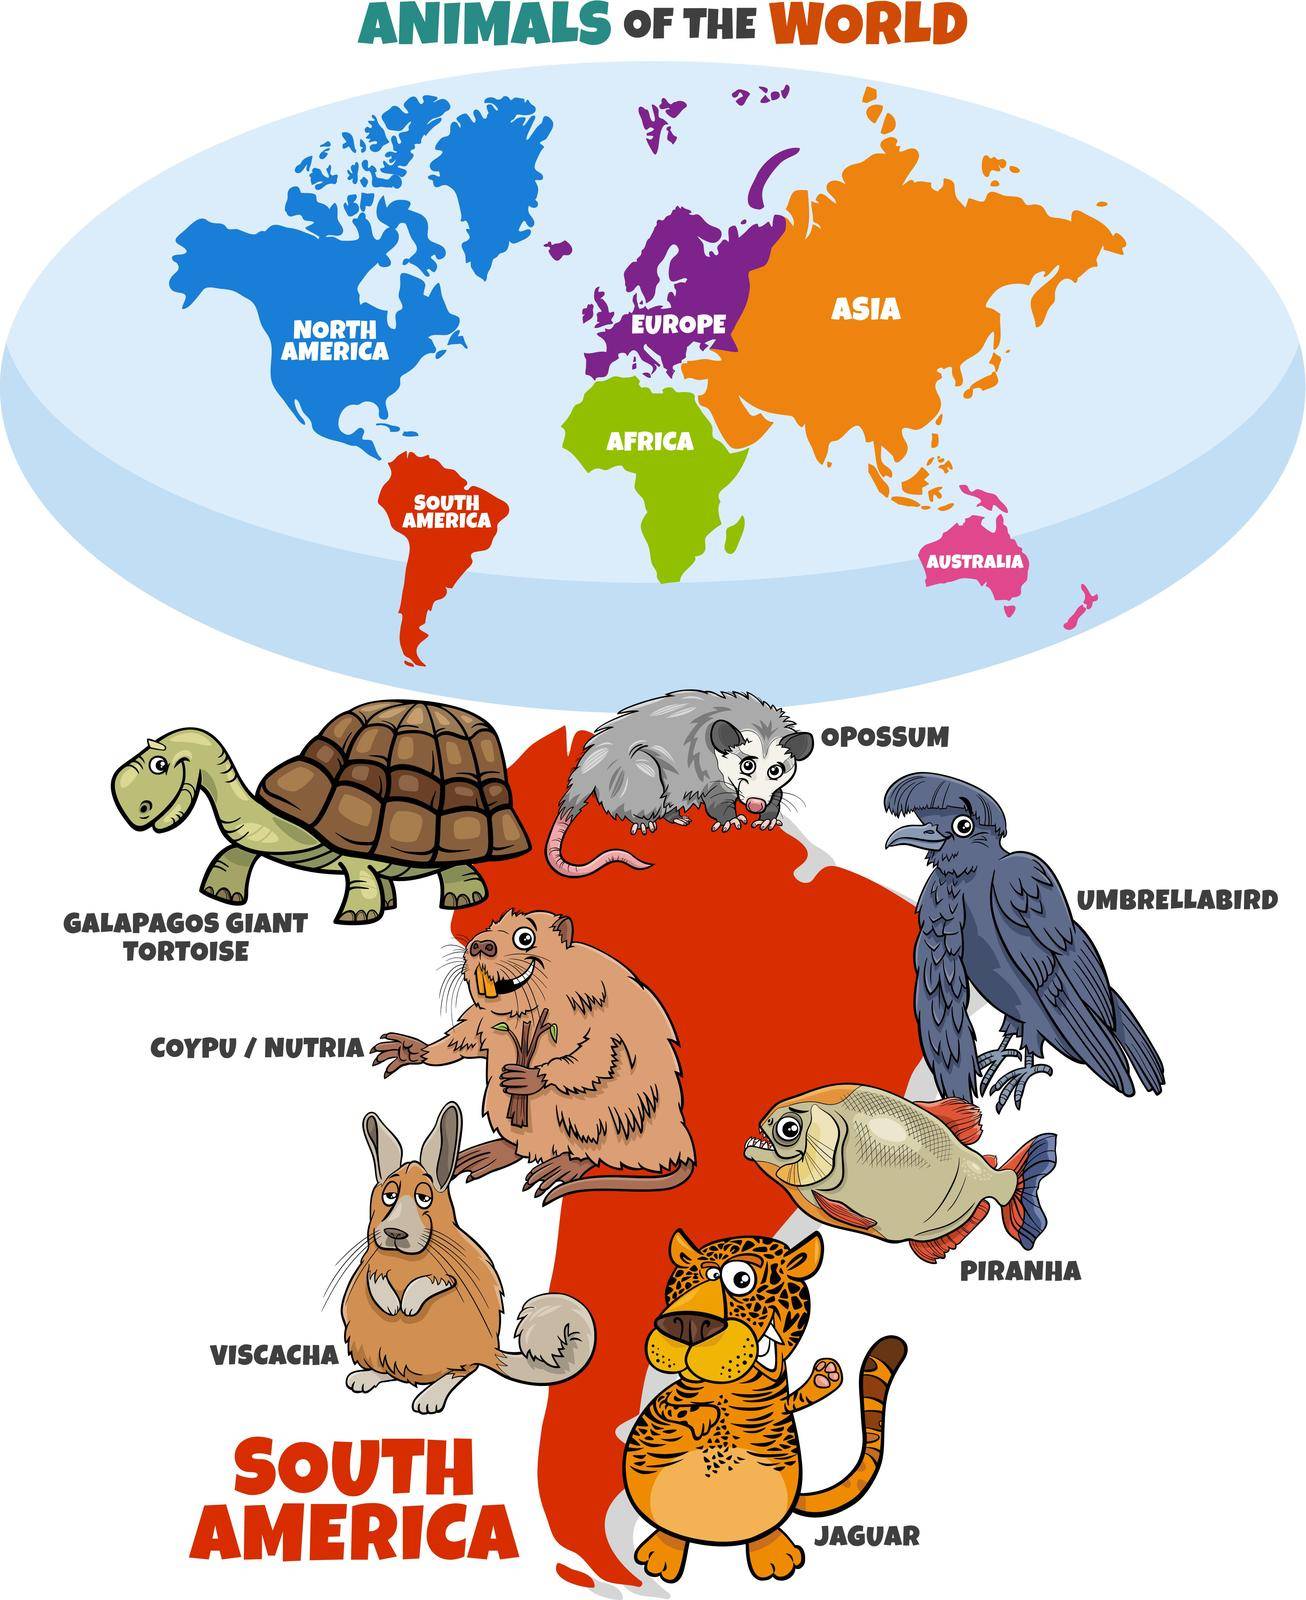 Educational cartoon illustration of South American animal species and world map with continents